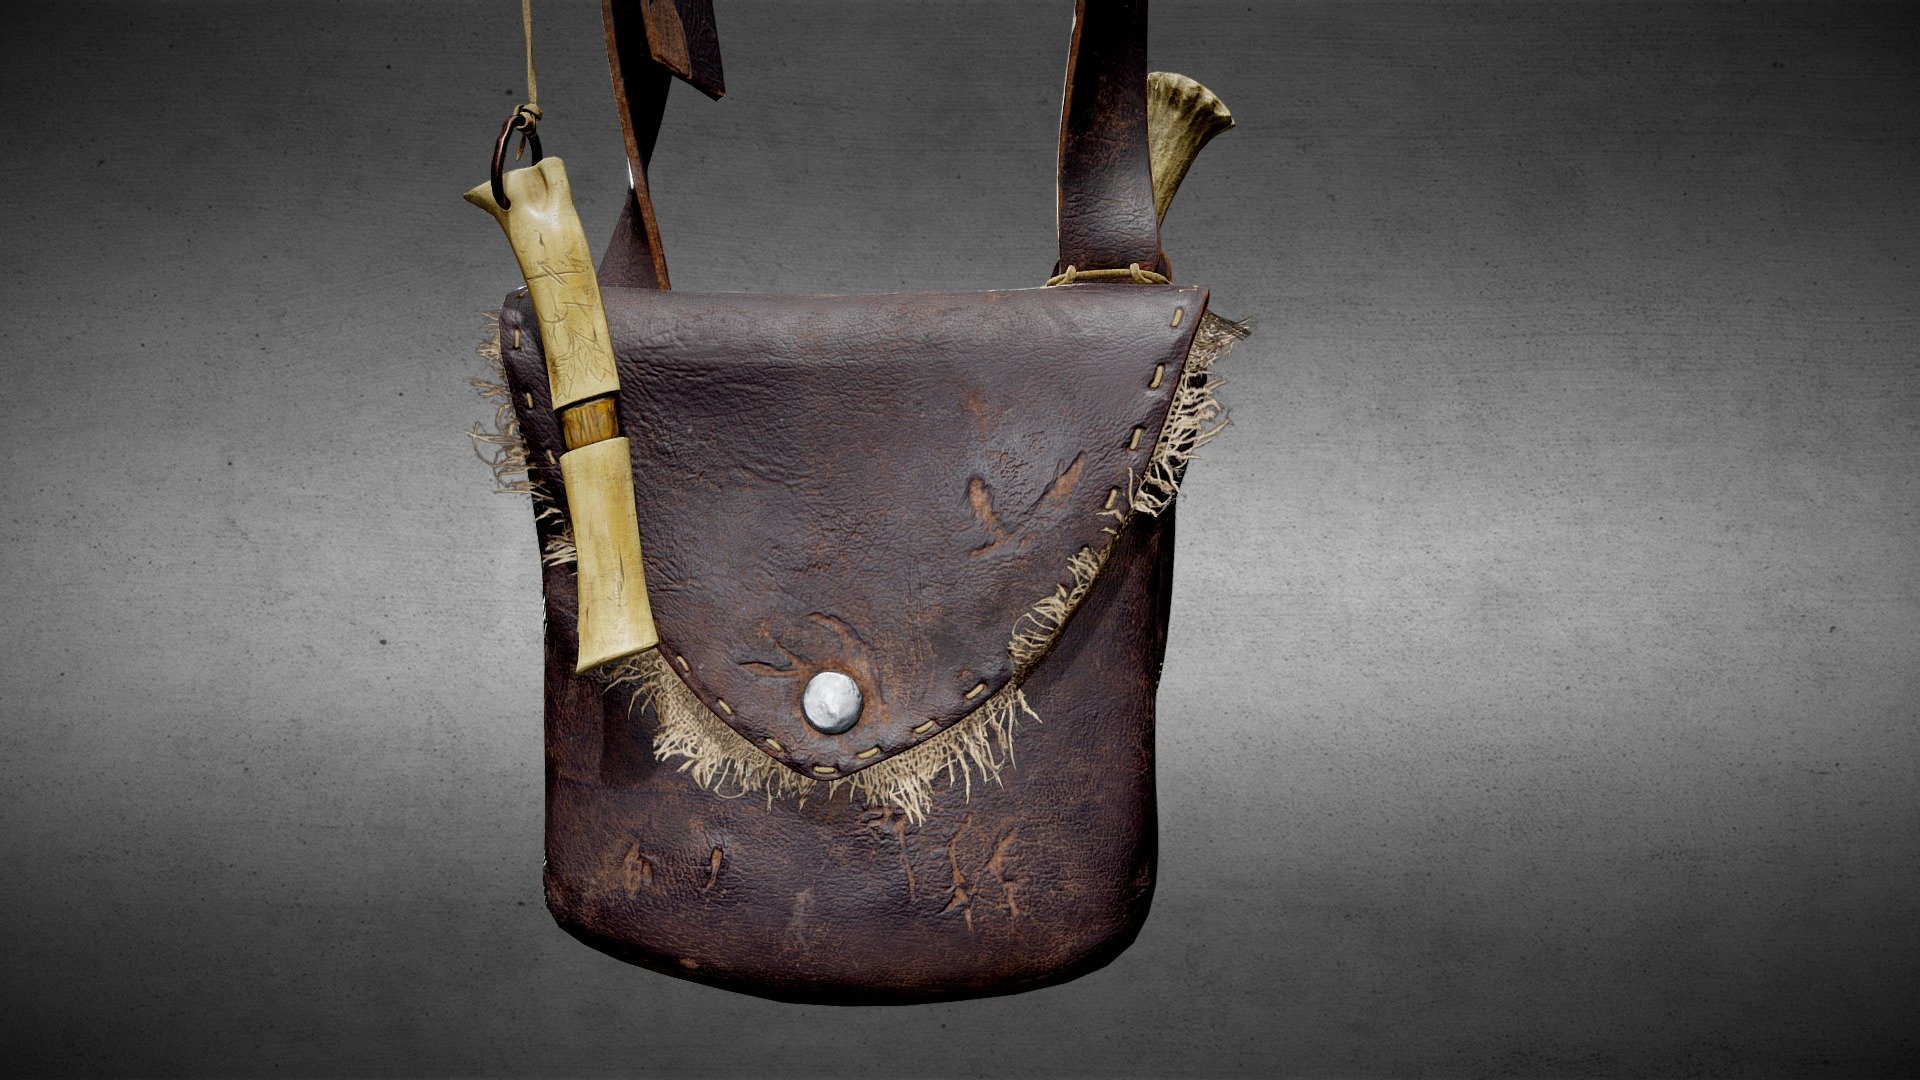 a small leather bag, fantasy illustration, medieval